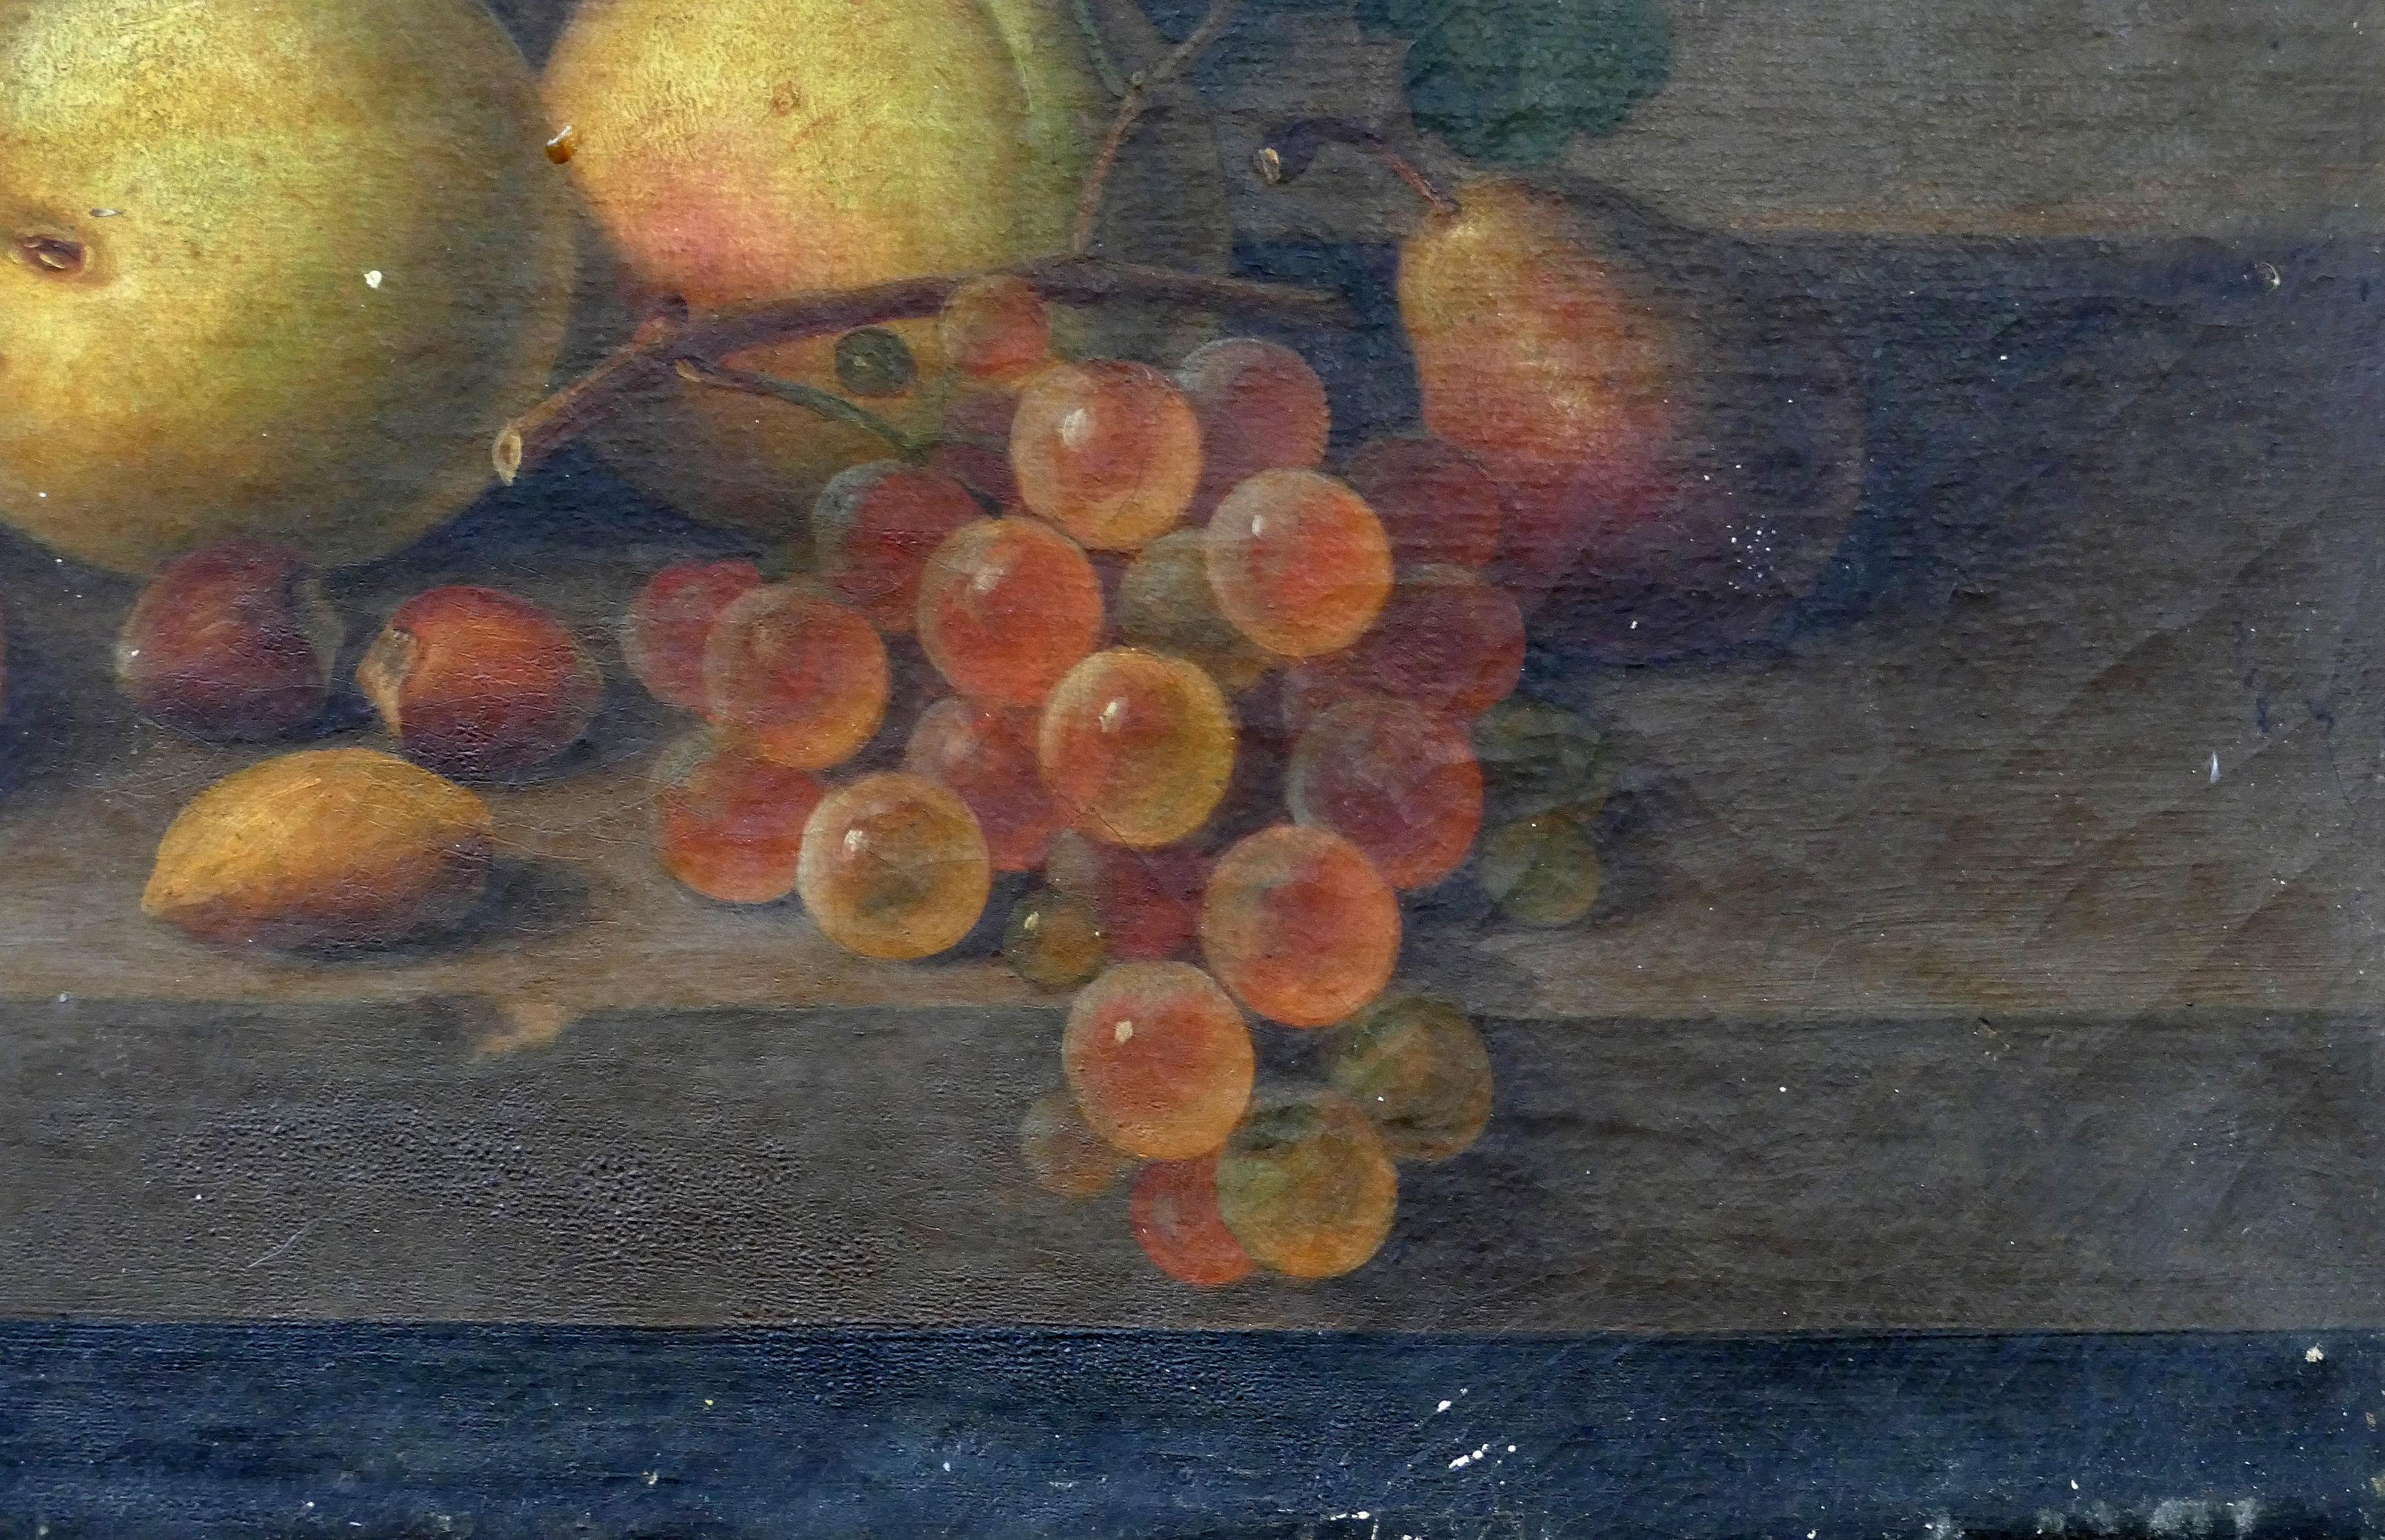 19th Century Paul LaCroix Fruit Still-Life Oil Painting on Canvas, 1865 in Original Frame